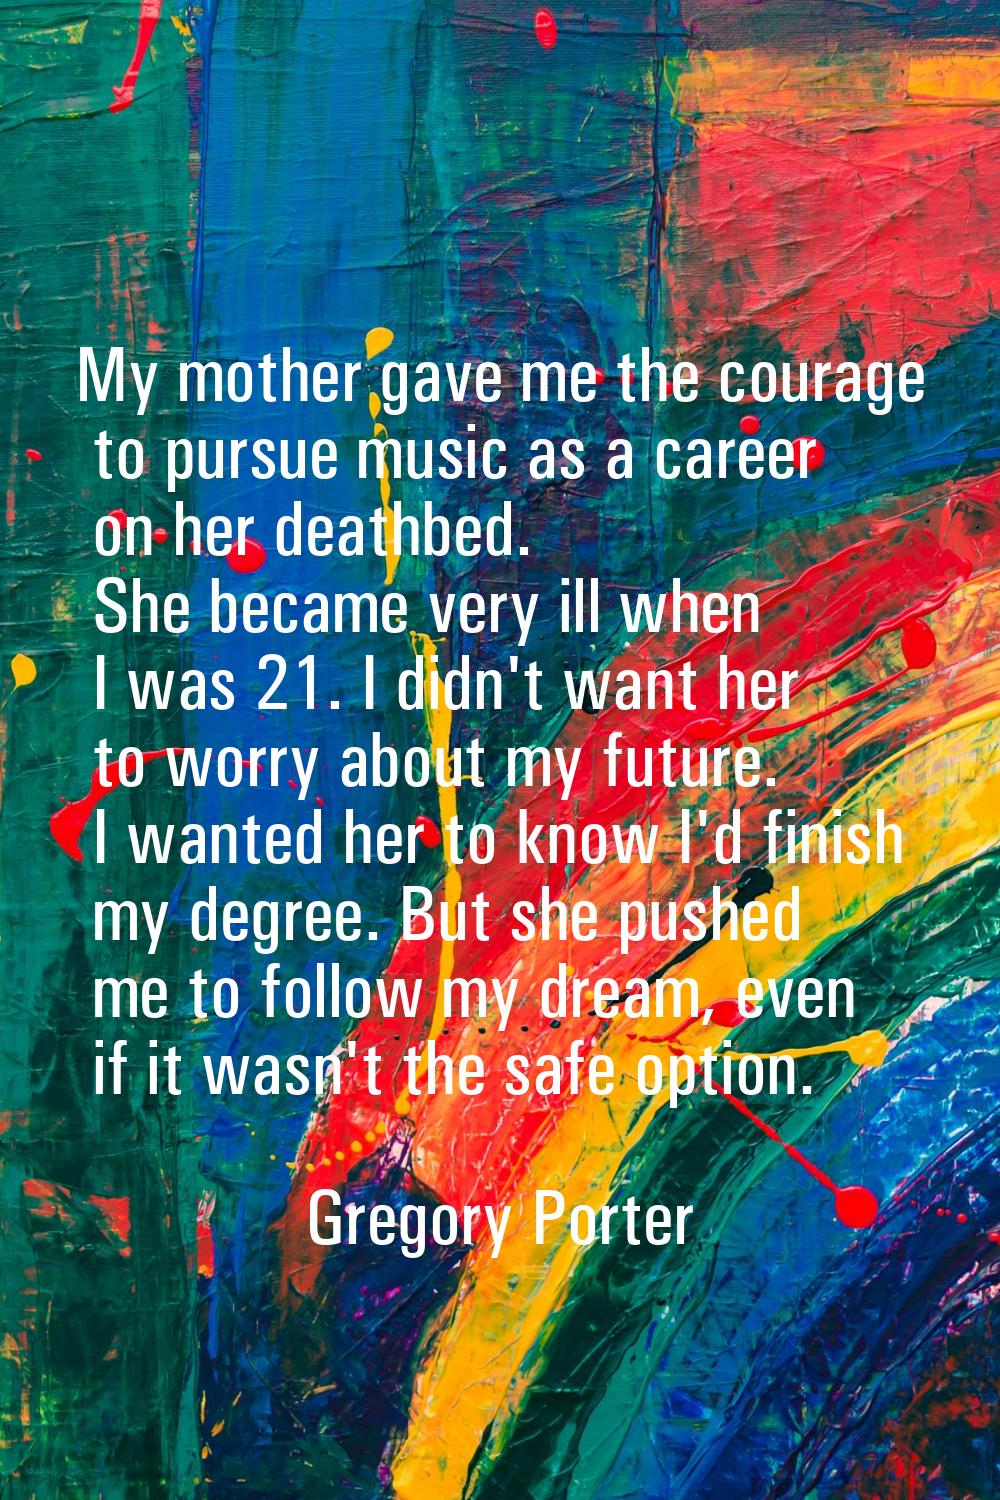 My mother gave me the courage to pursue music as a career on her deathbed. She became very ill when